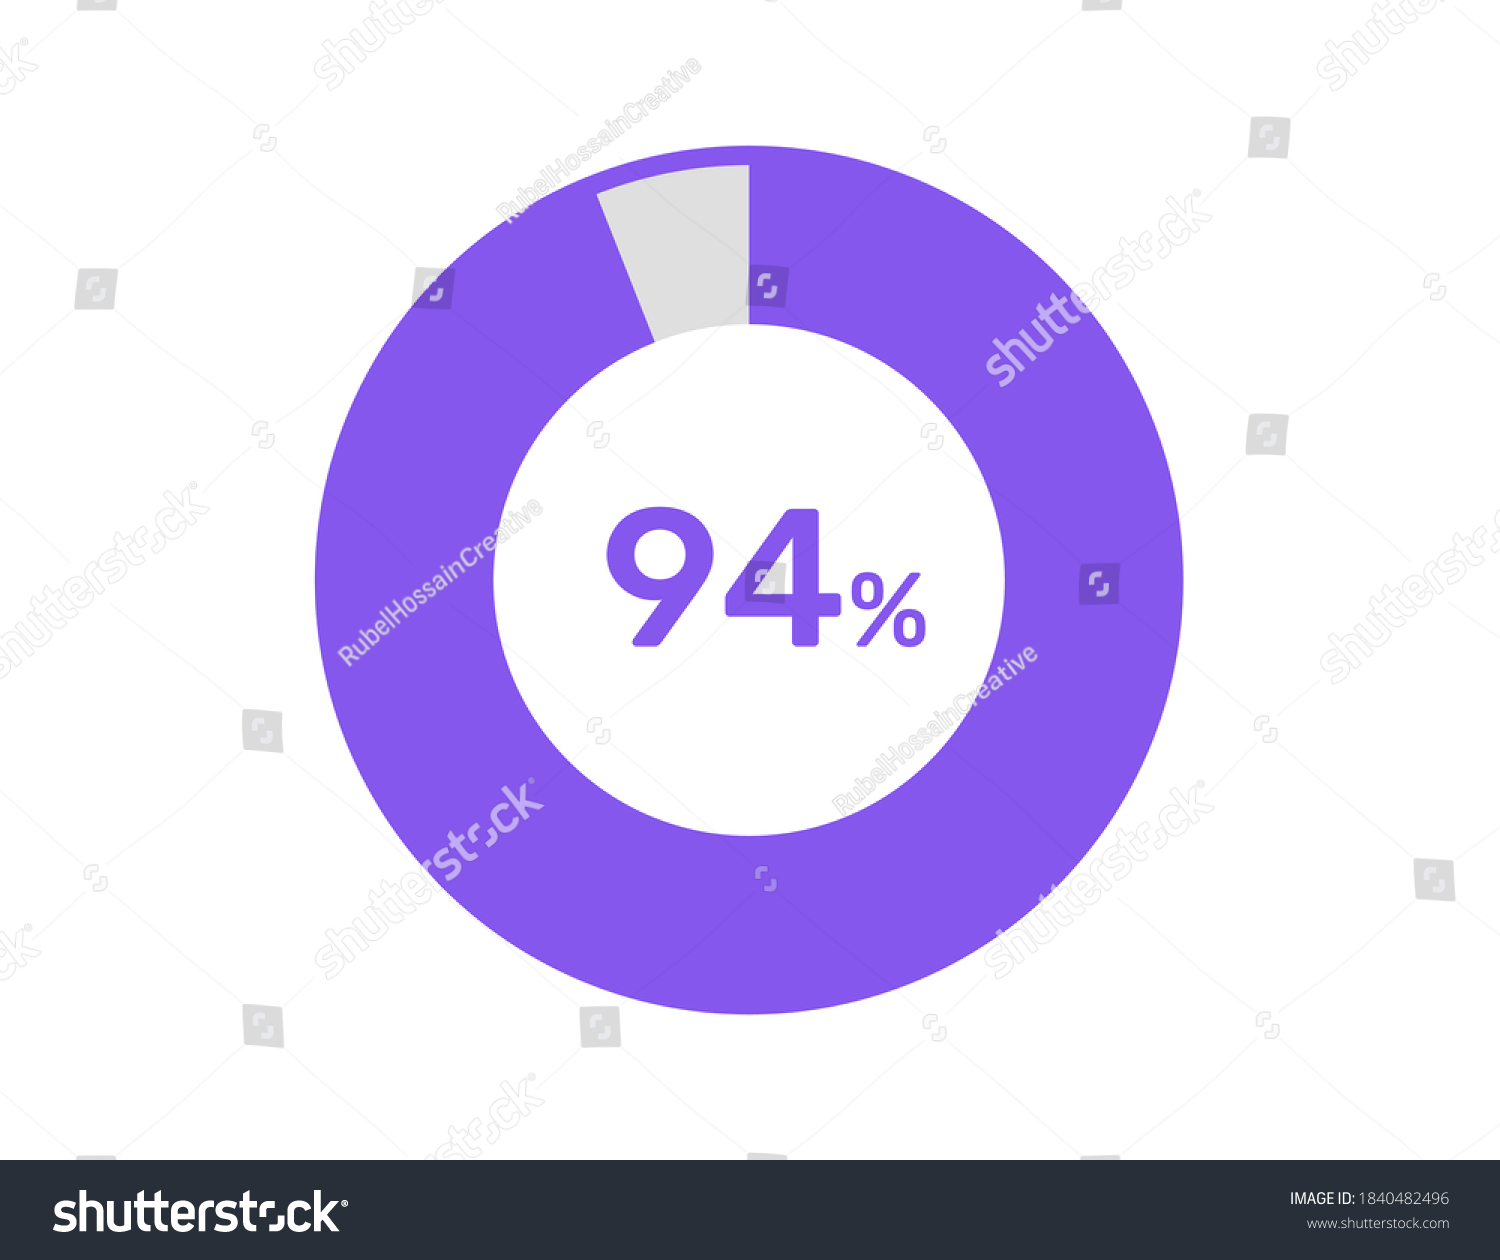 SVG of 94% circle percentage diagrams, 94 Percentage ready to use for web design, infographic or business  svg